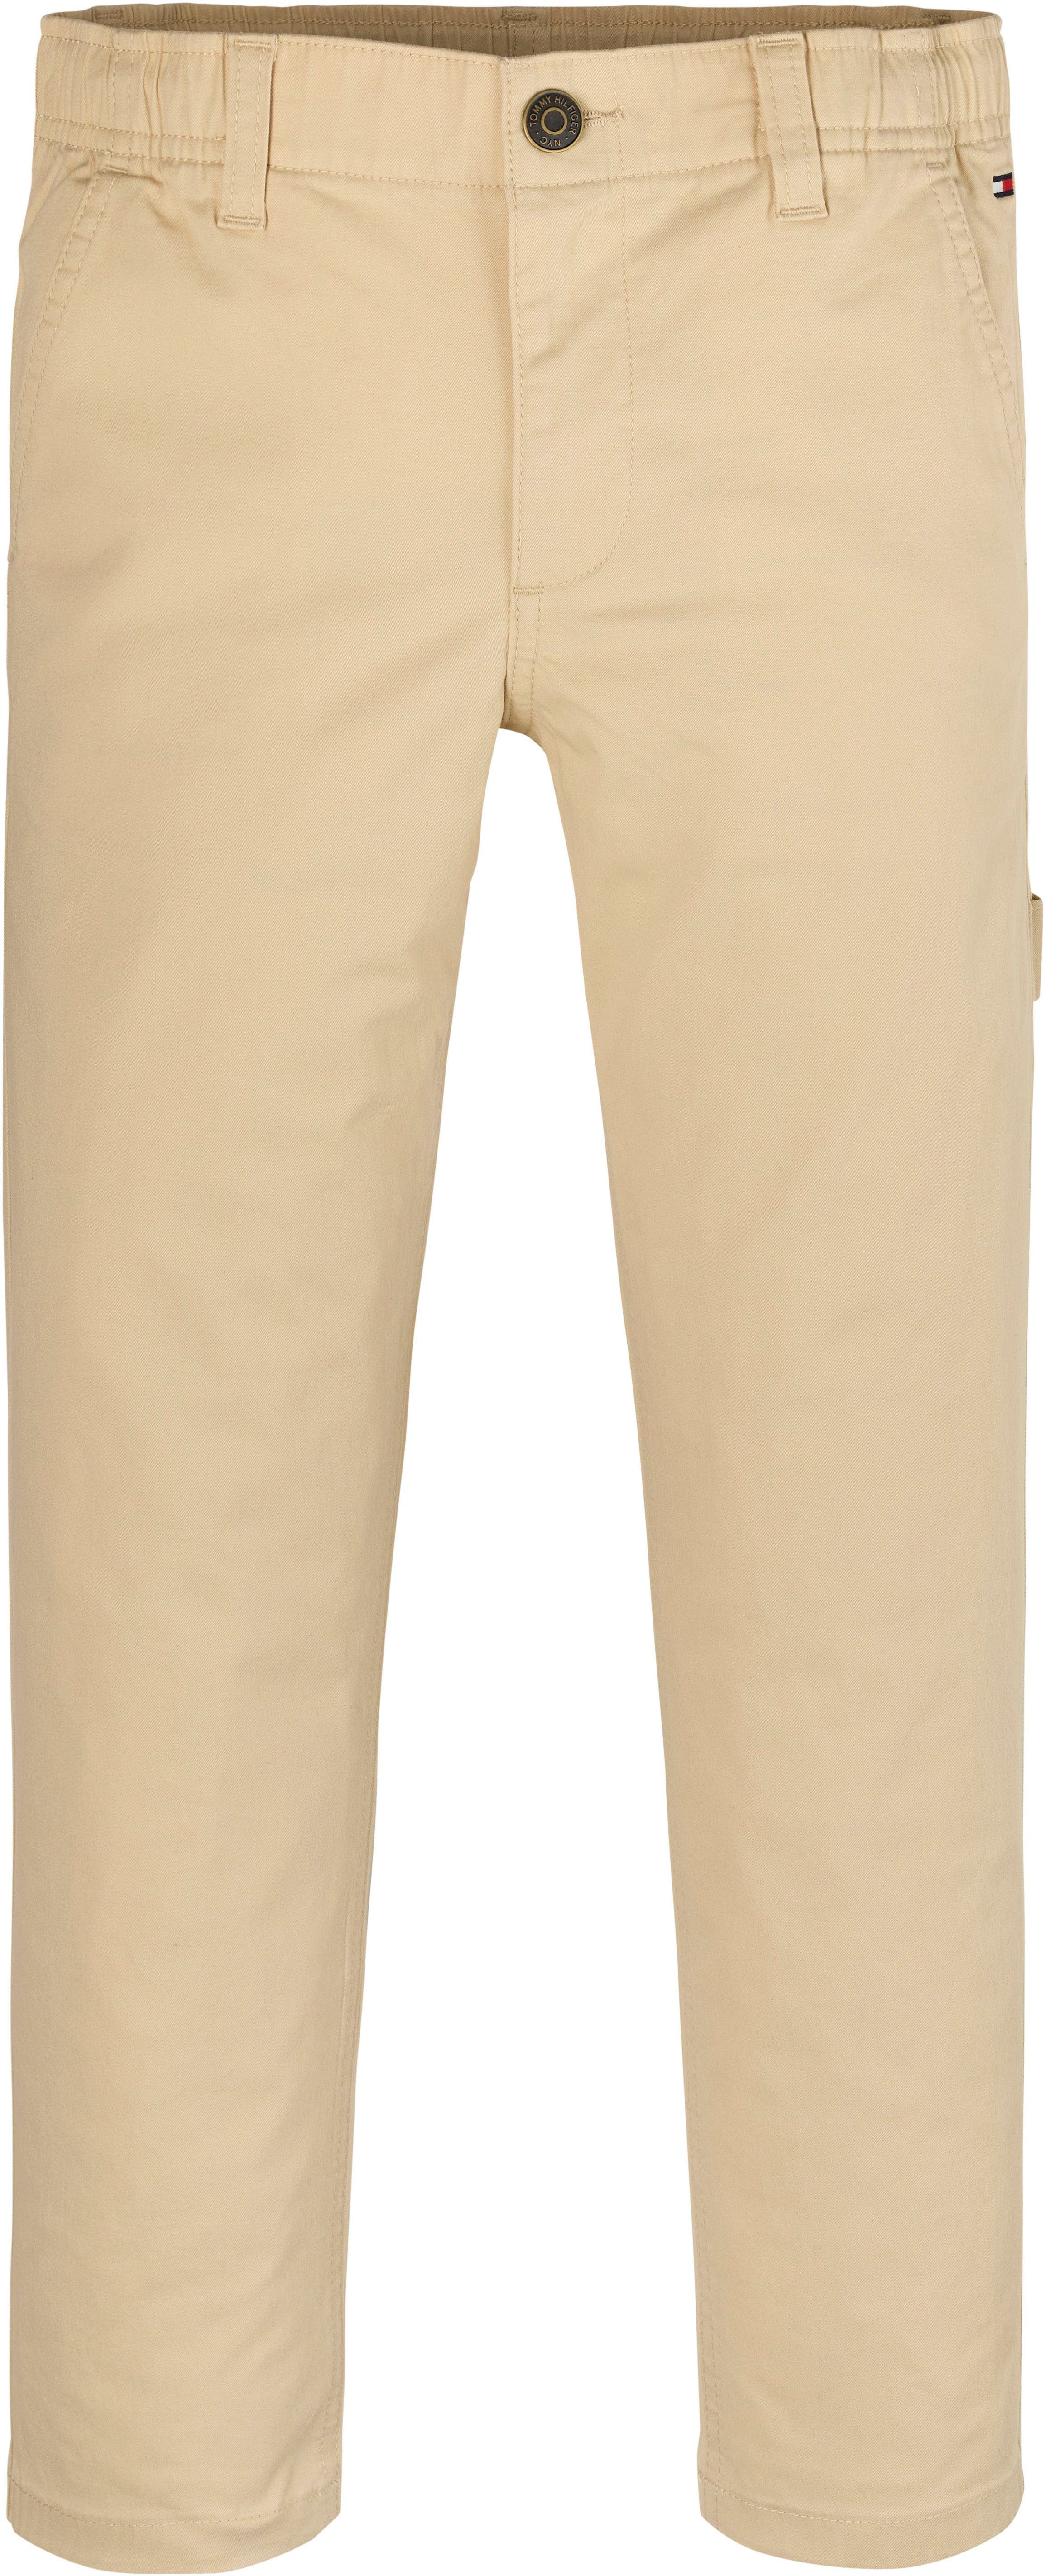 Tommy Hilfiger Logostickerei PULL PANTS mit Webhose WOVEN ON SKATER